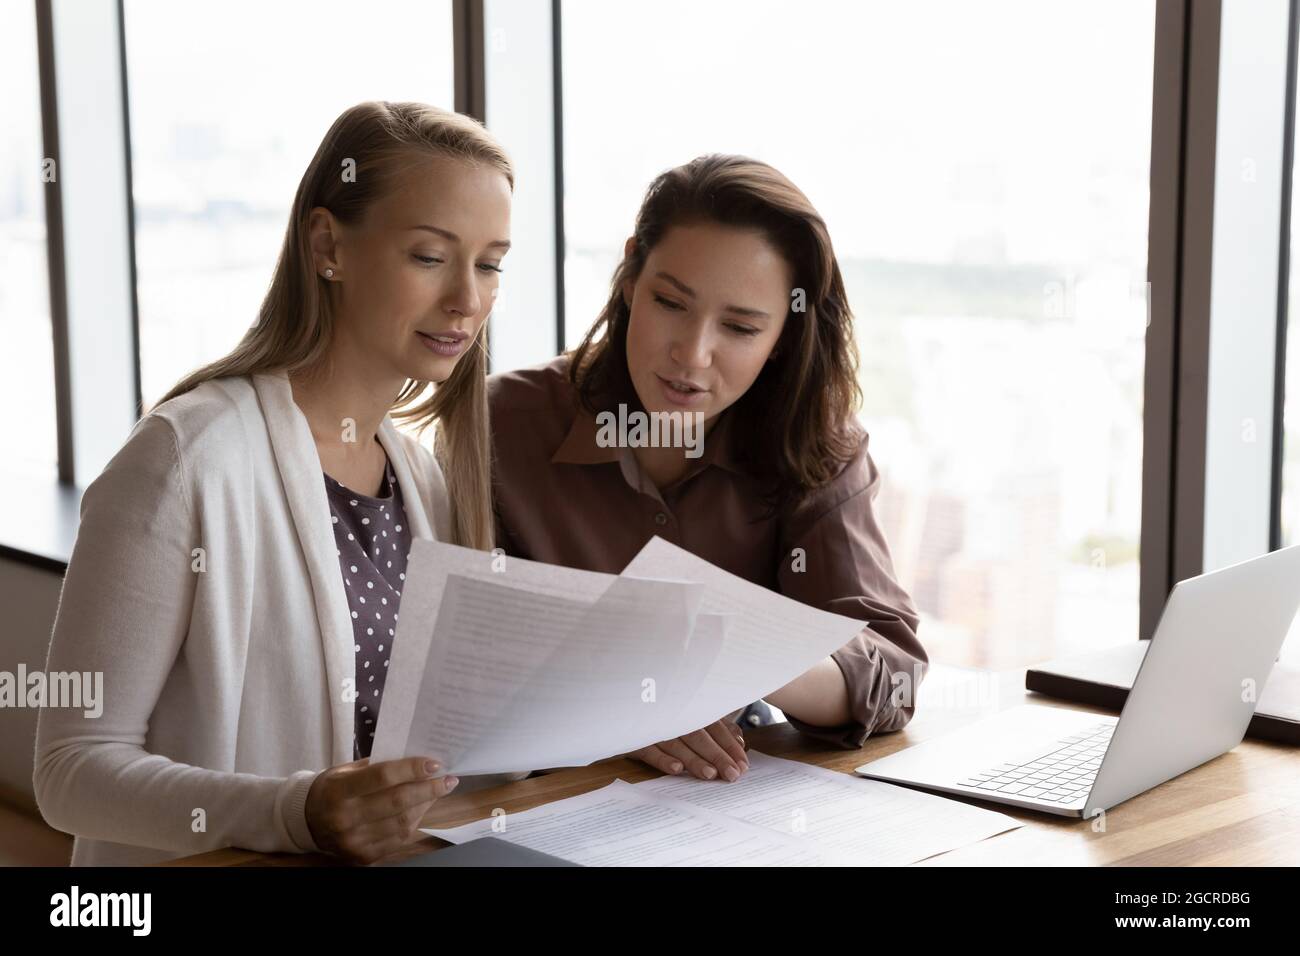 Corporate leader training new employee. Mentor showing company to intern Stock Photo